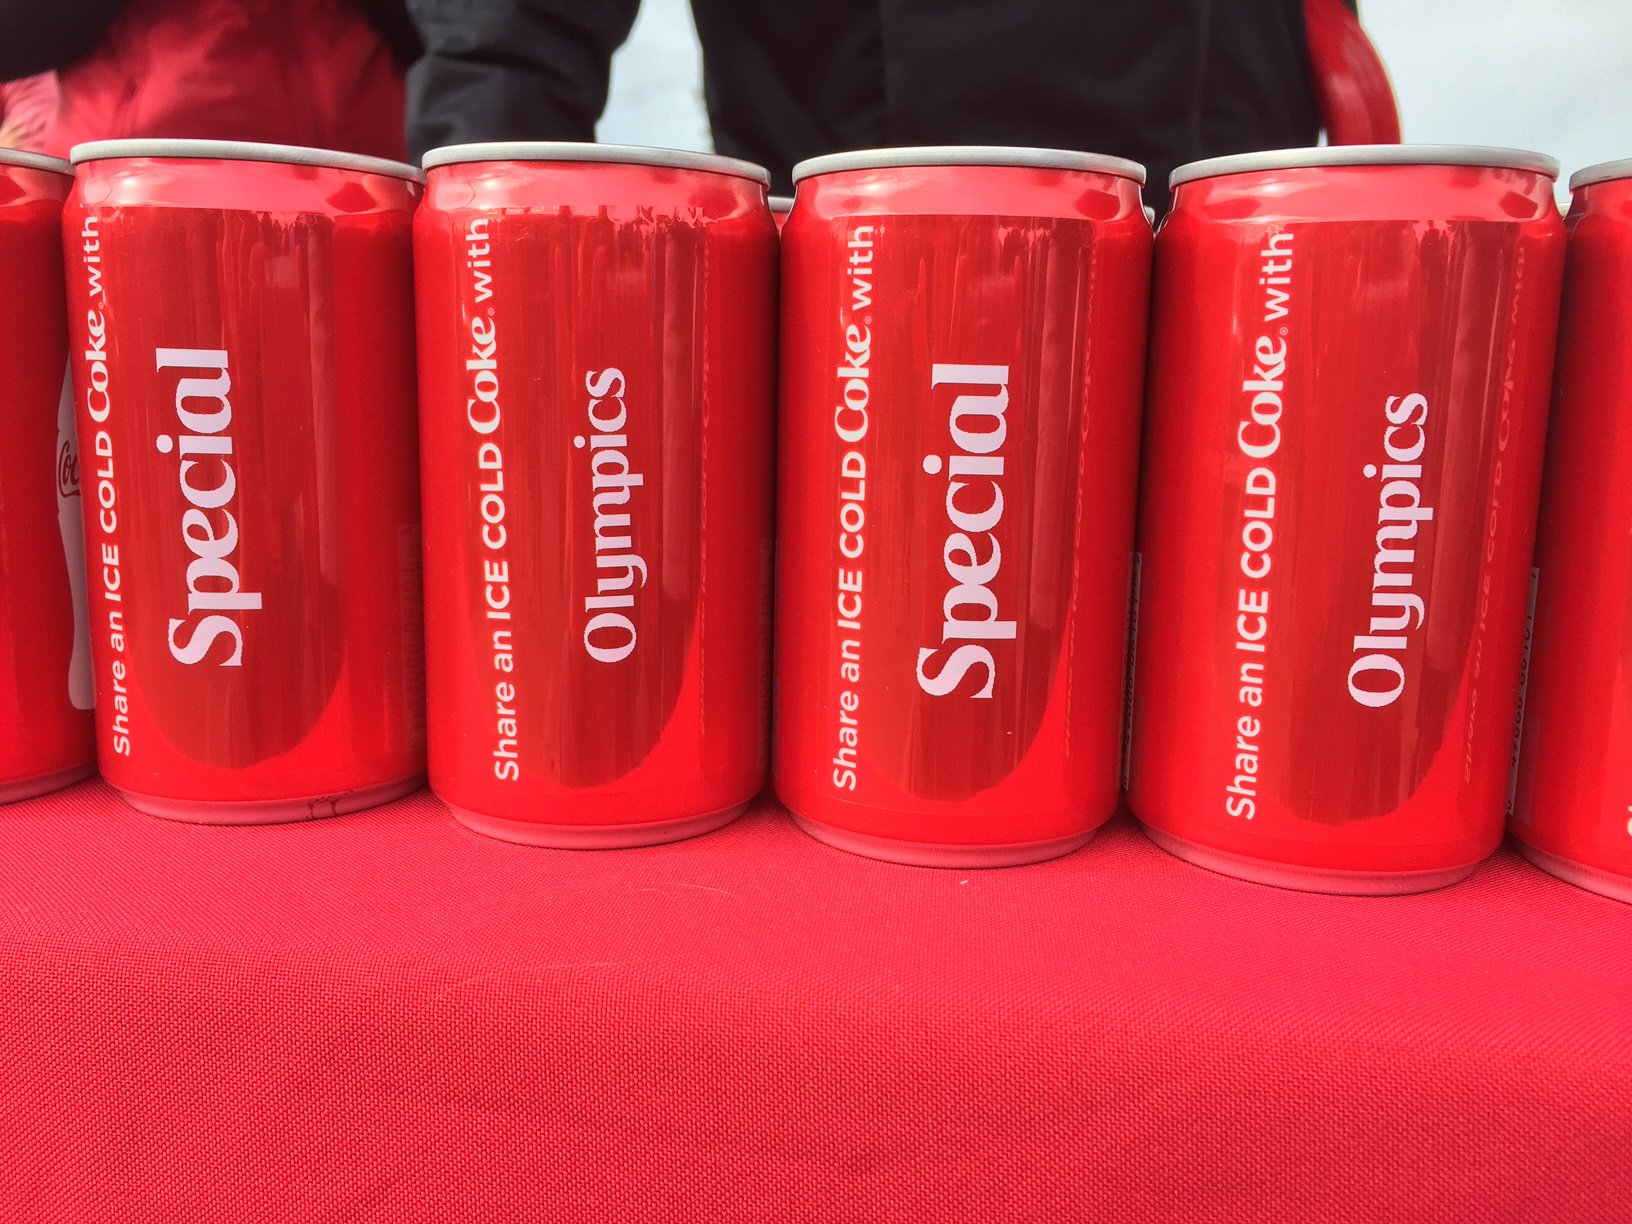 Special Olympics Cans.jpg